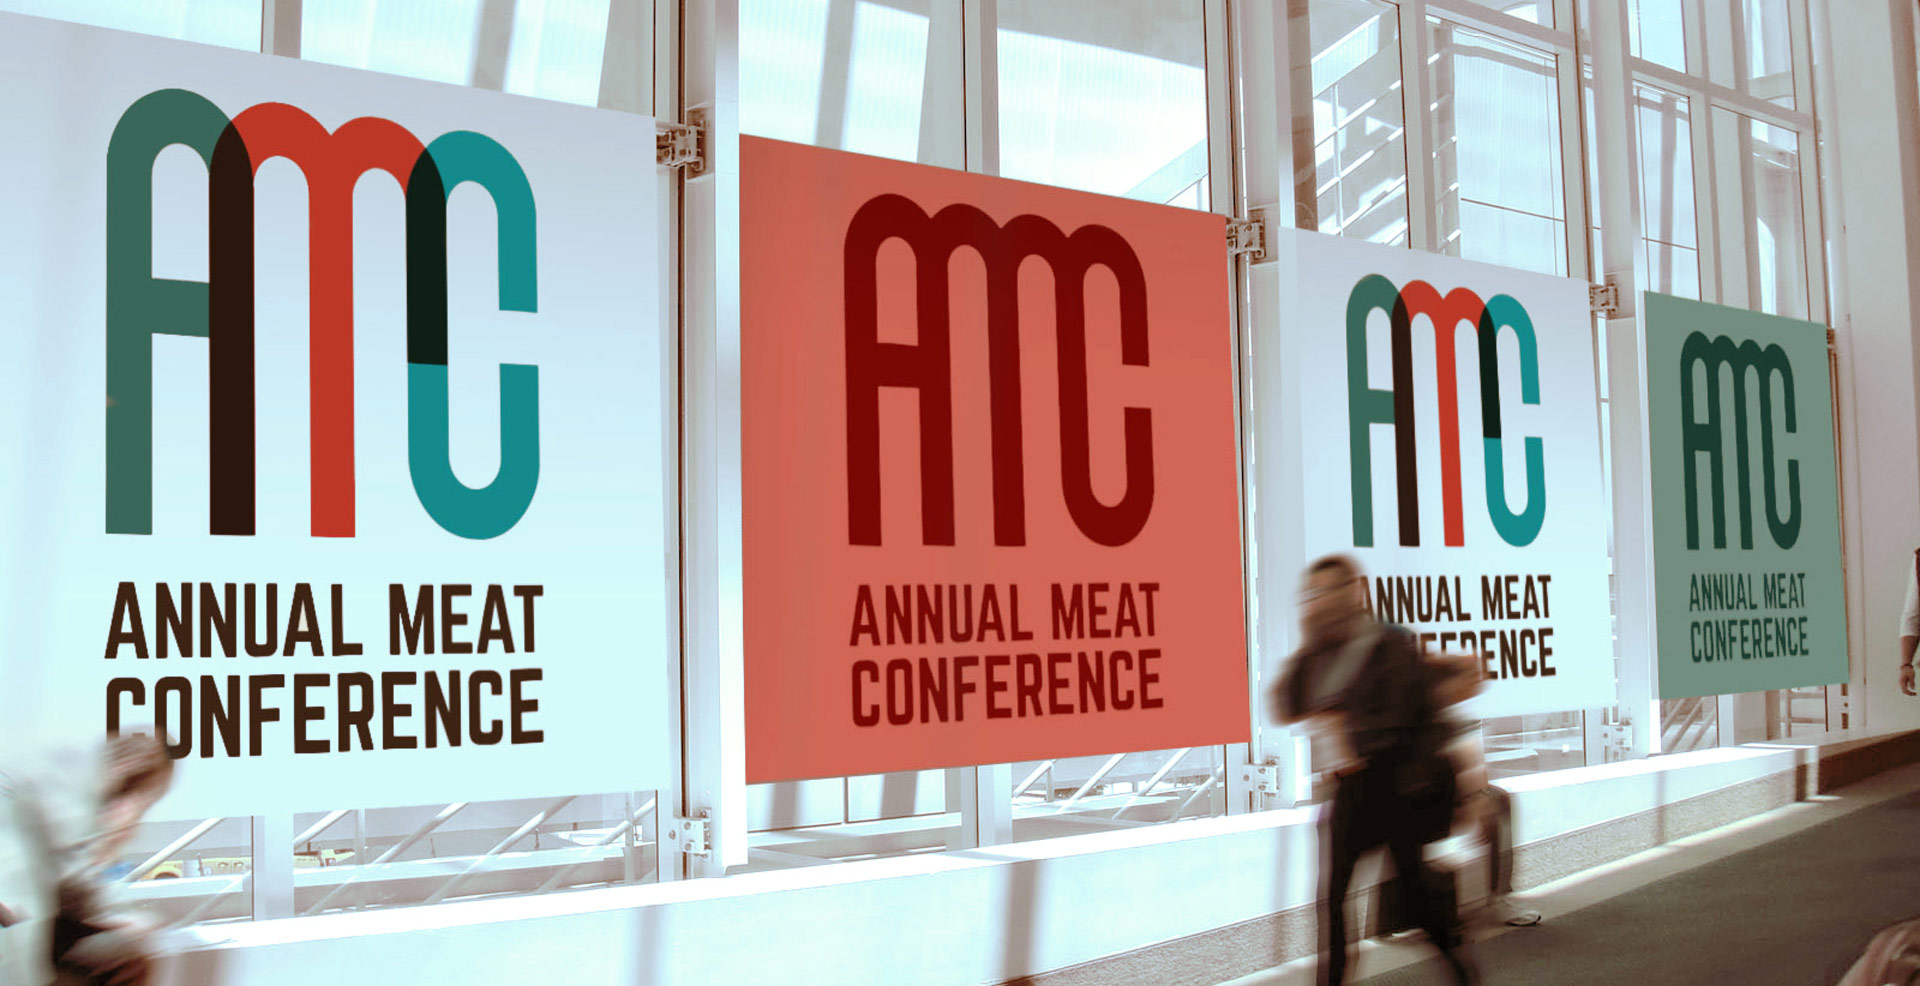 The updated Annual Meat Conference logo designed by Midan displayed in three different treatments